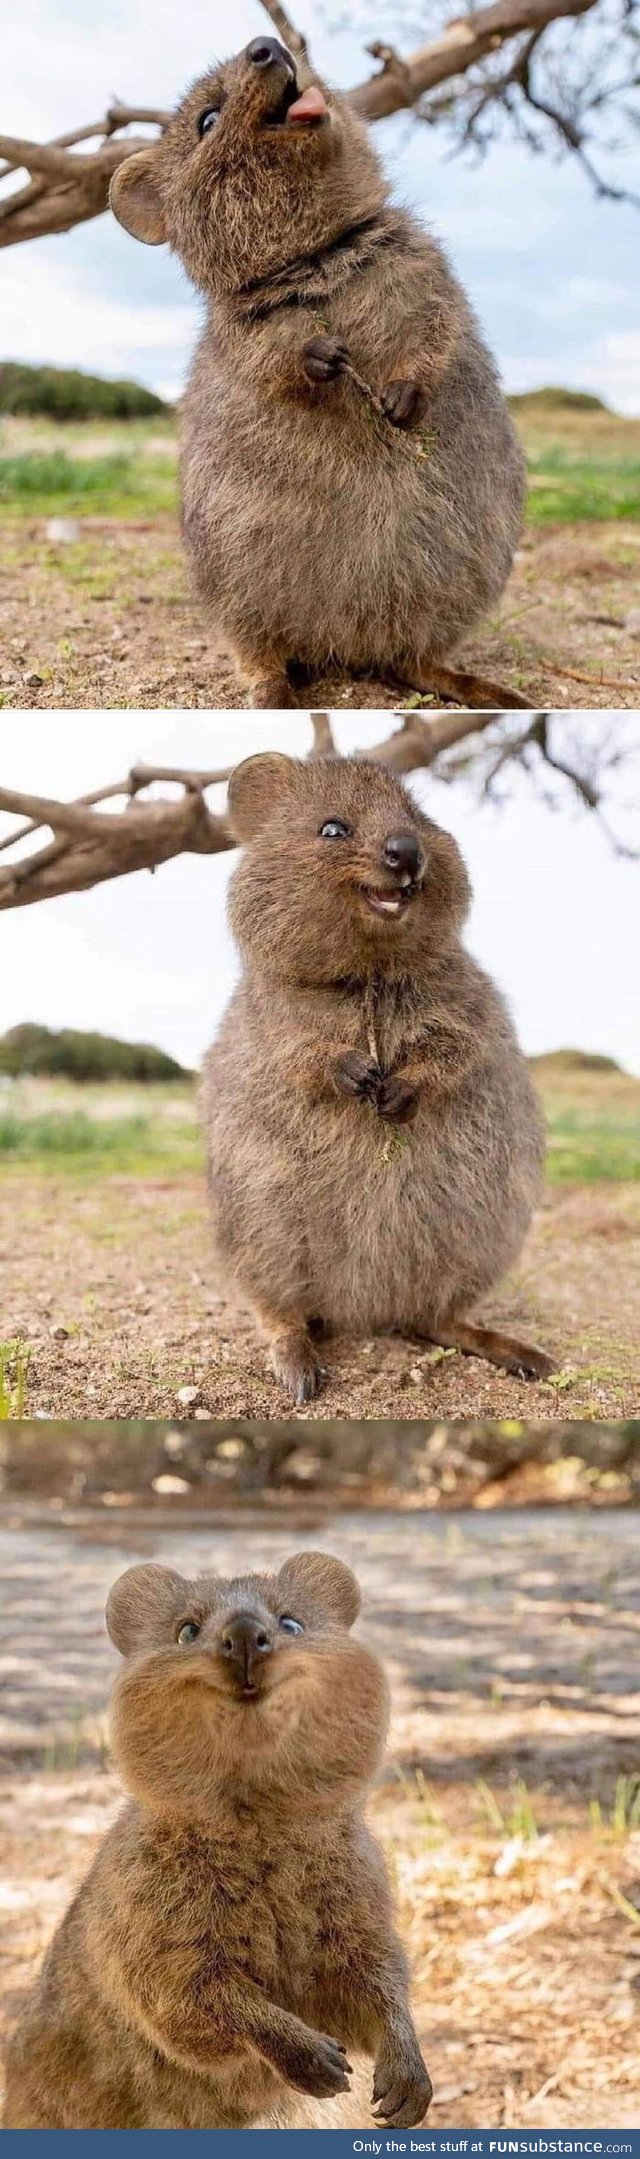 The Quokkas considered the happiest animal in the world